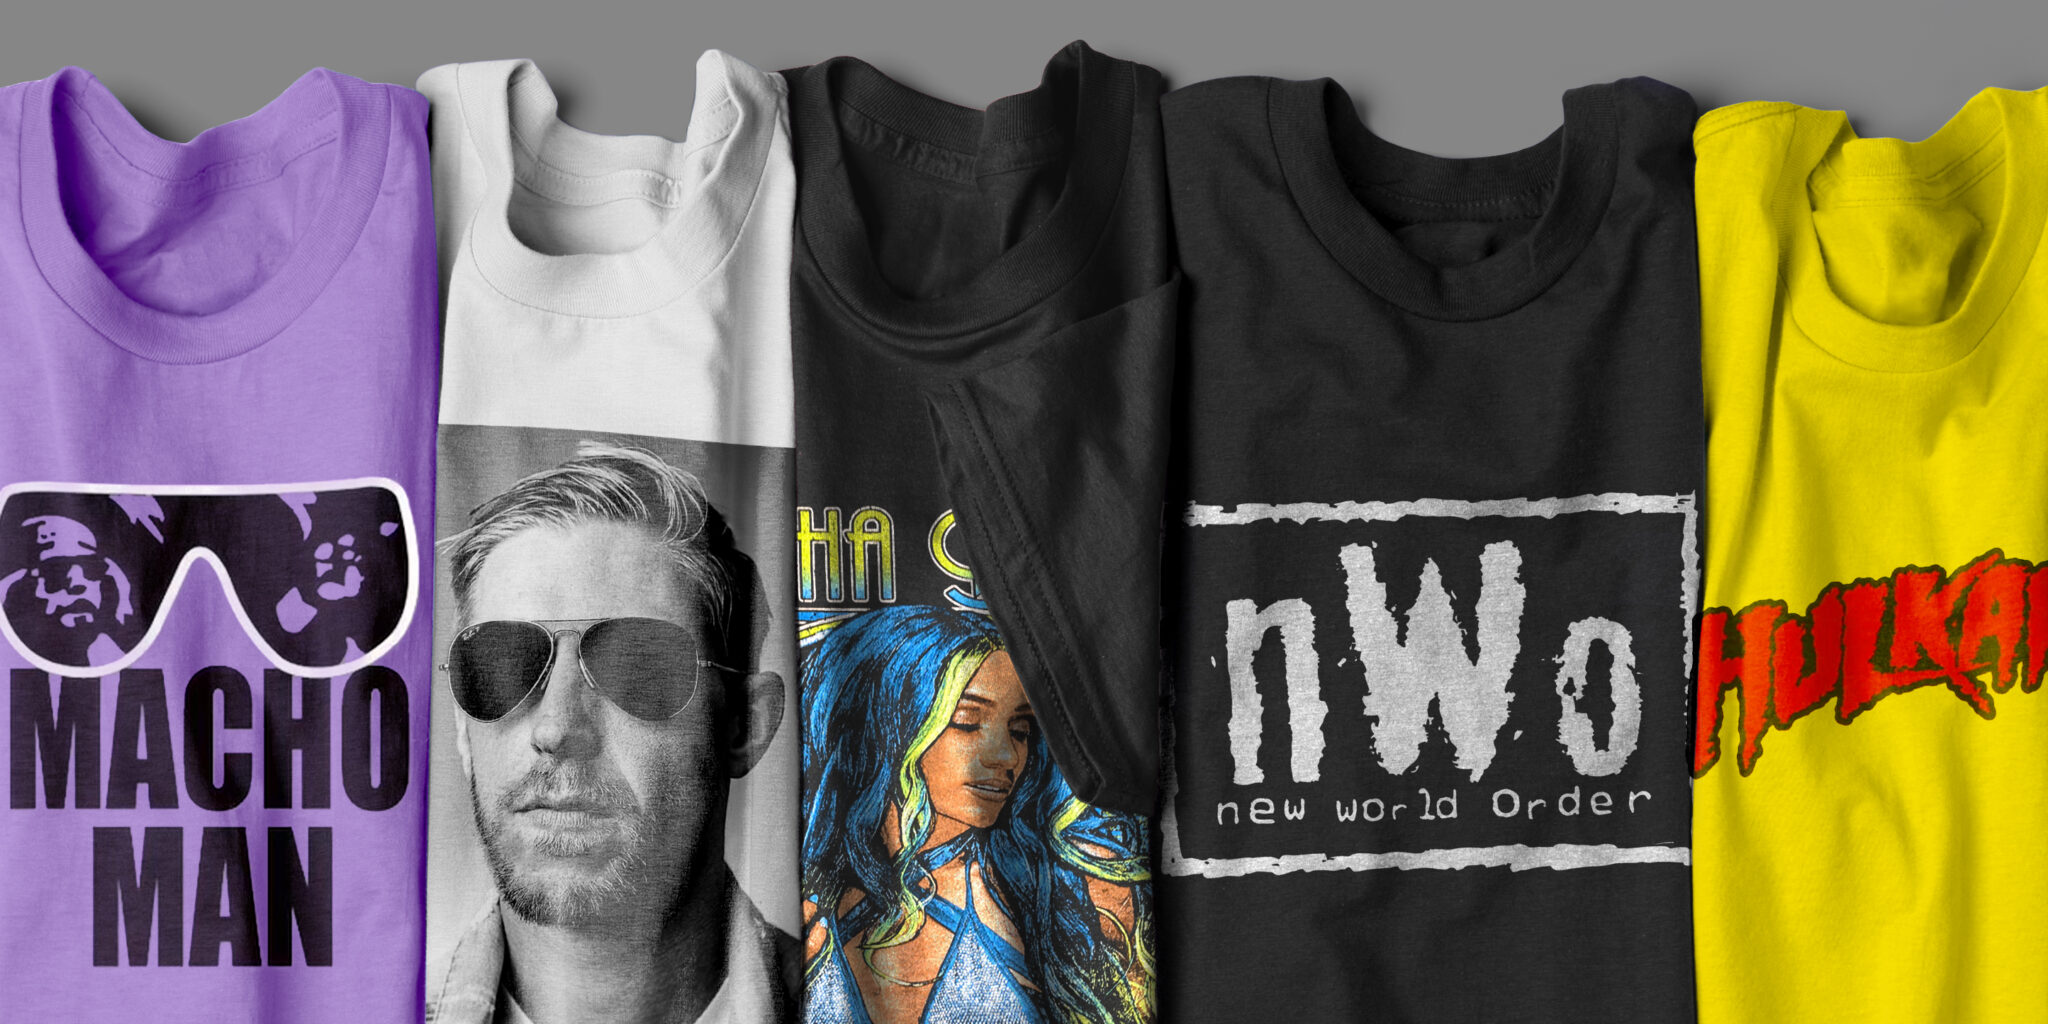 A lineup of some of the most iconic wrestling t-shirts: "Macho Man" Randy Savage, Orance Cassidy, Sasha Banks, nWo: New World Order, and Hulkamania. 